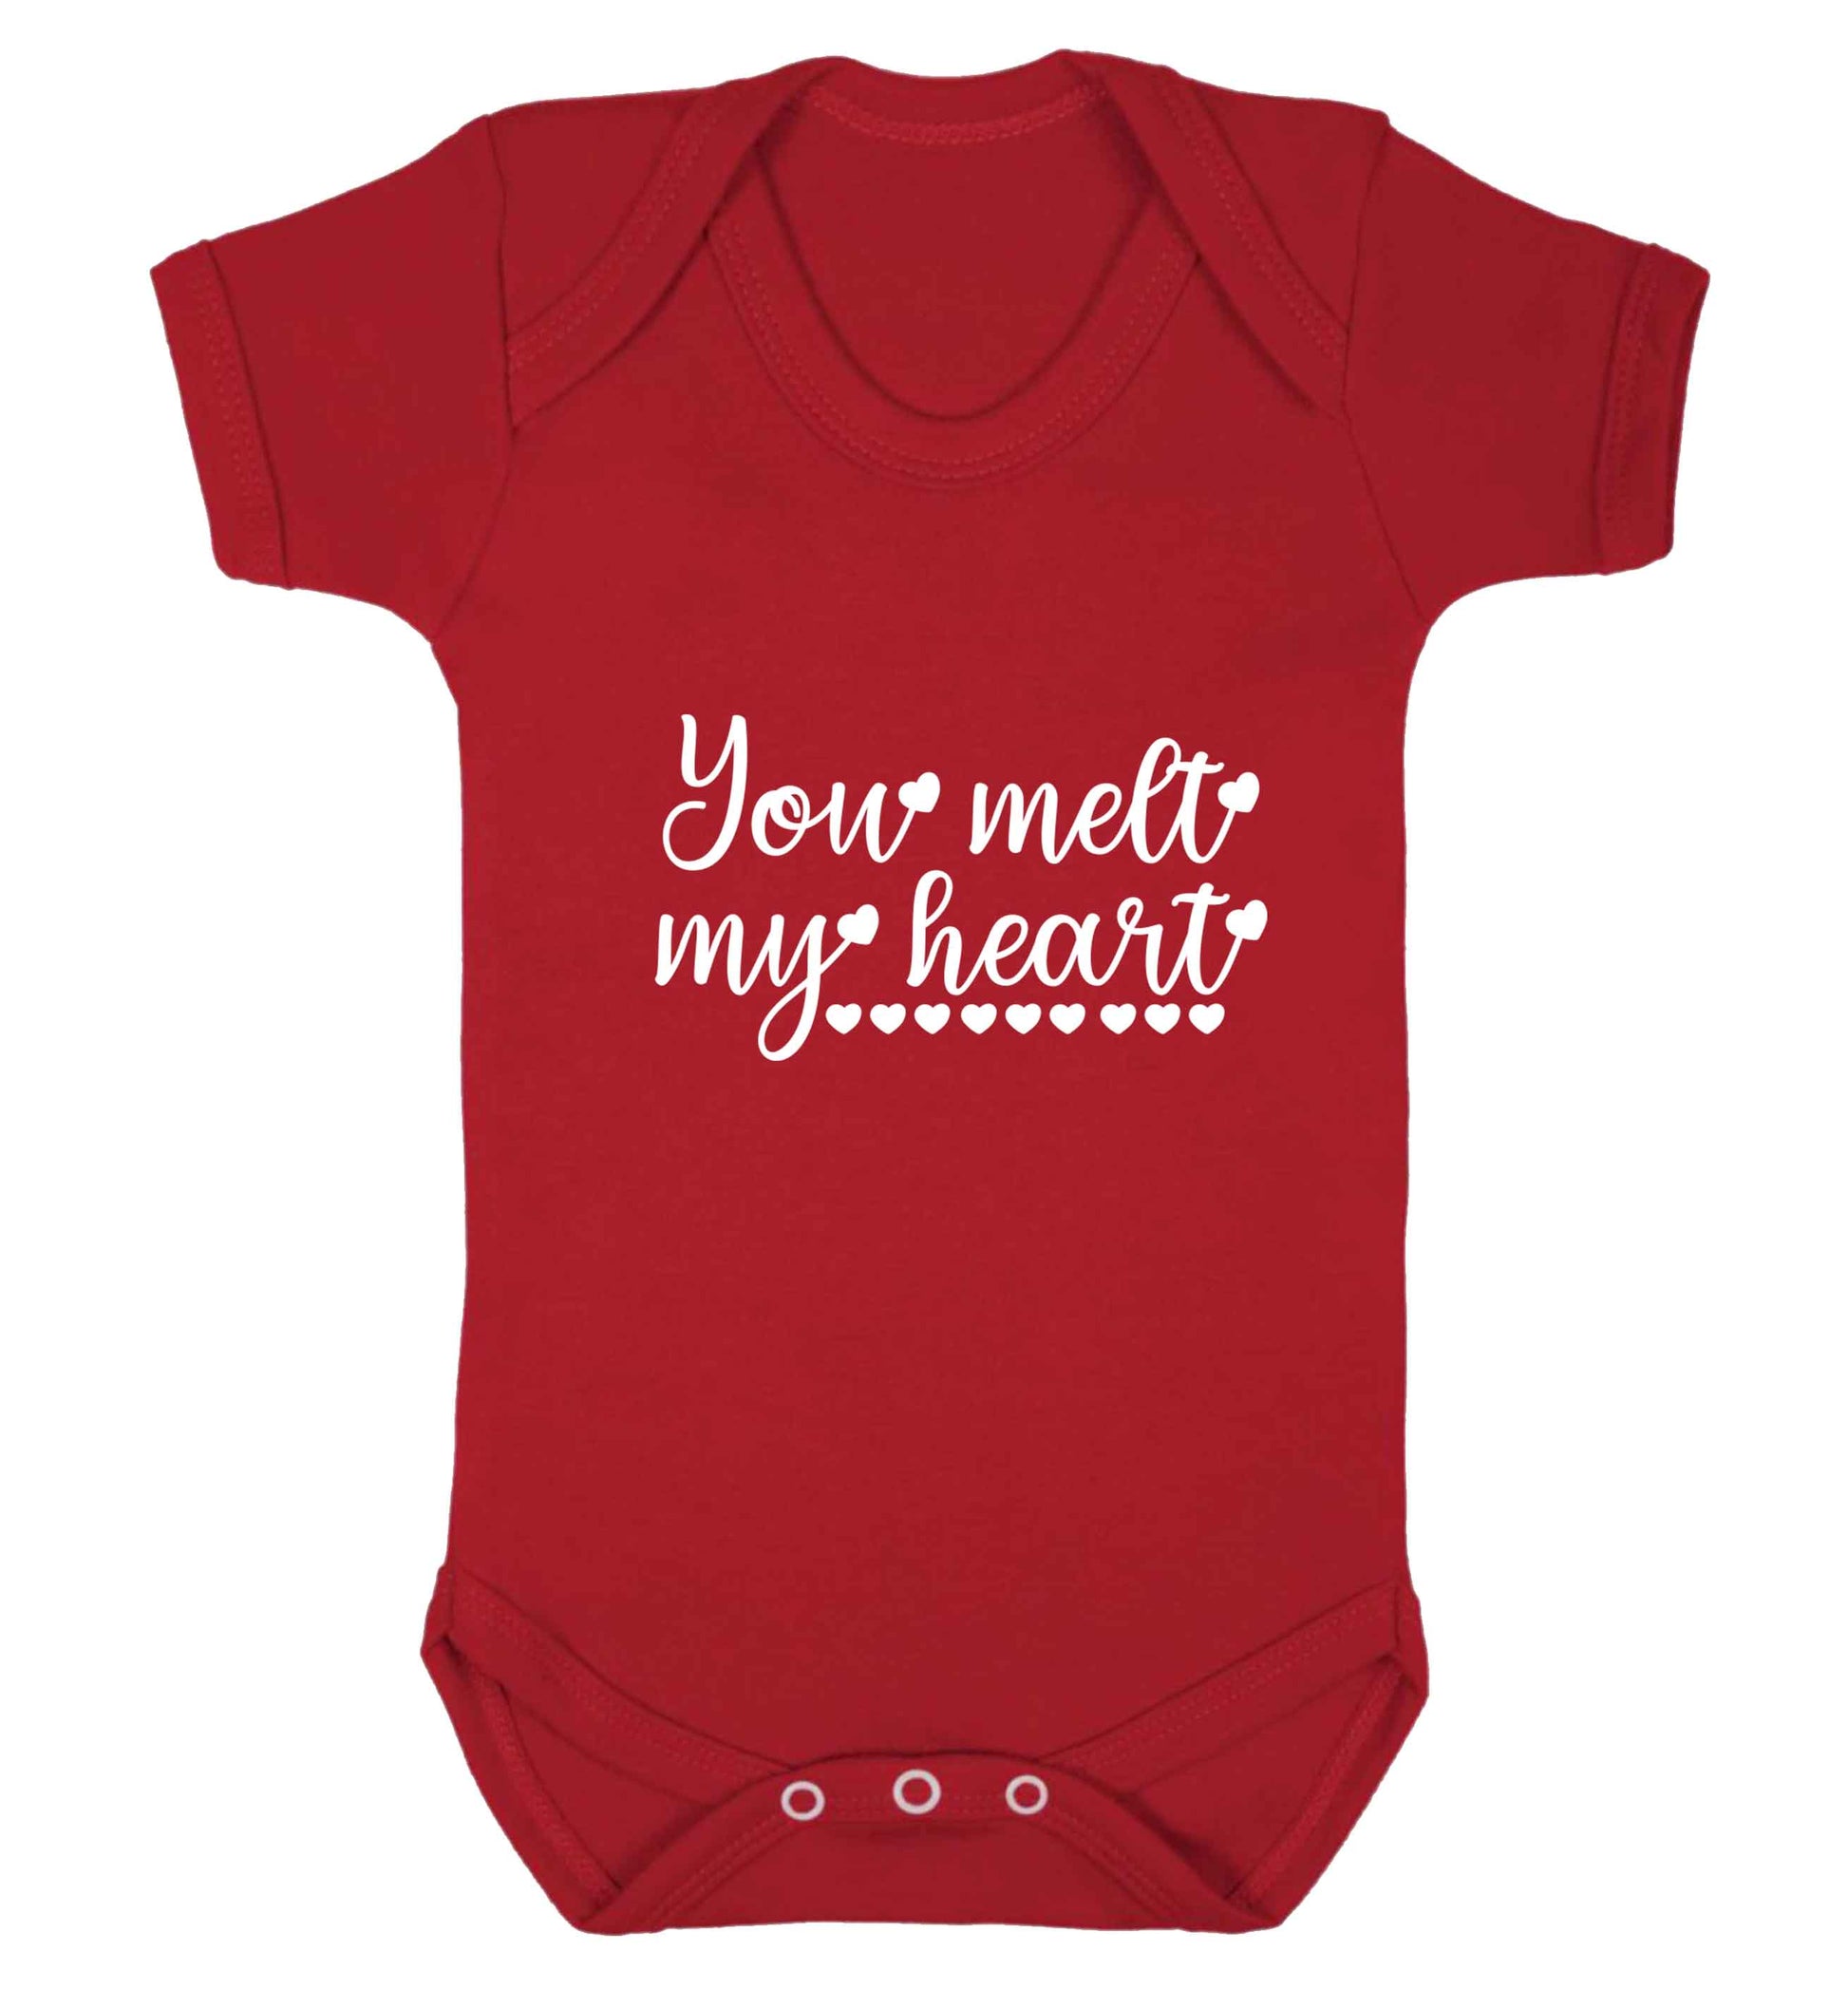 You melt my heart baby vest red 18-24 months